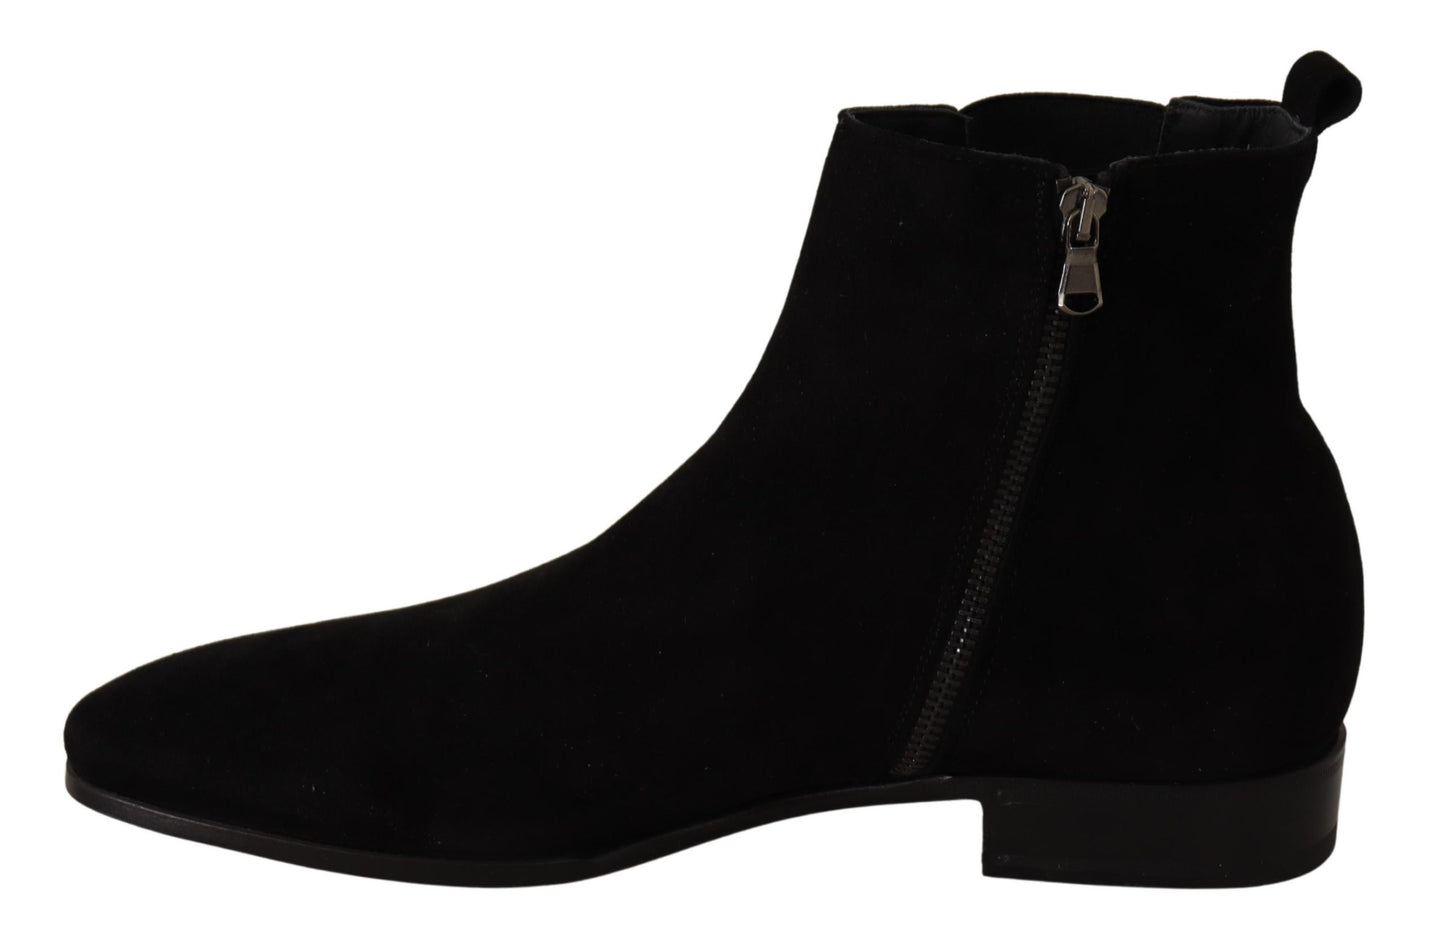 Black Suede Leather Chelsea Boots Shoes